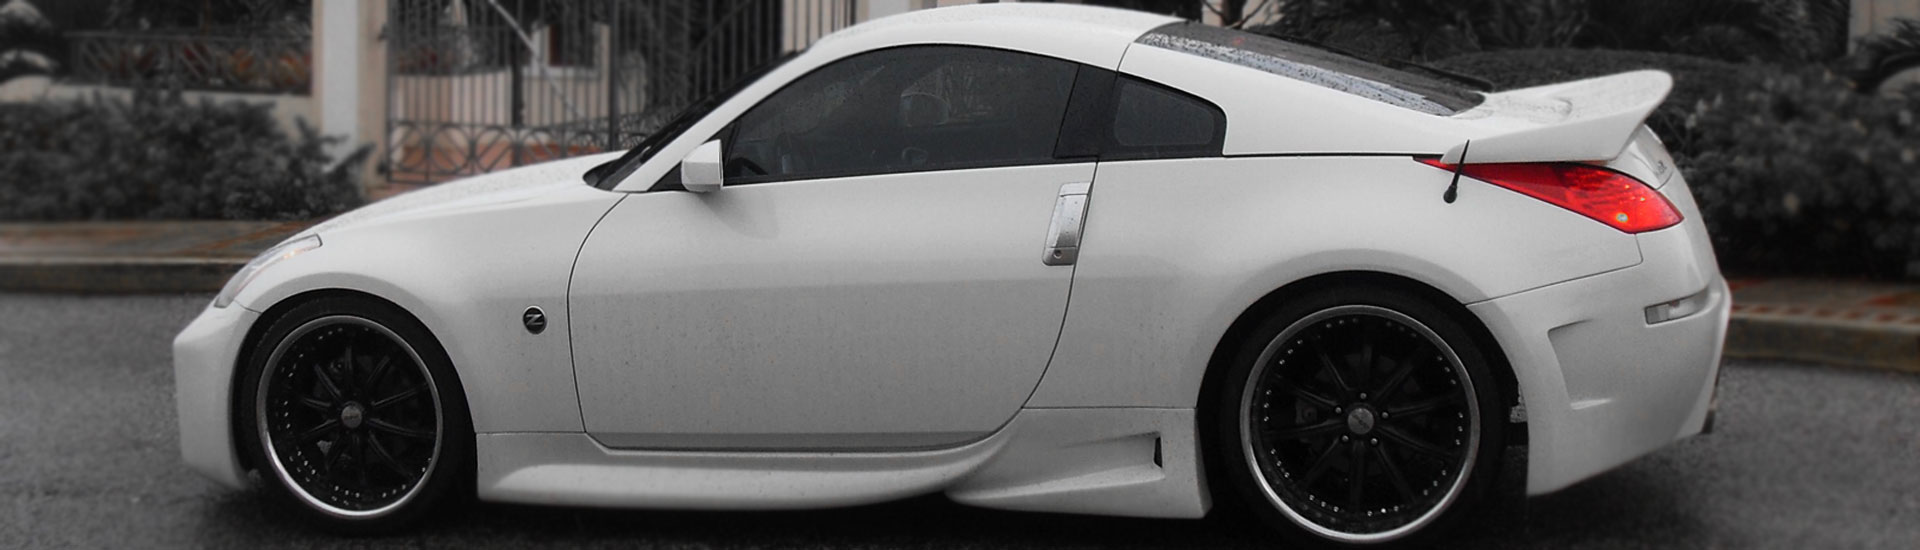 Details about   Precut Tint Front 2 Door Windows Computer Cut Any Film Shade for Nissan 350Z